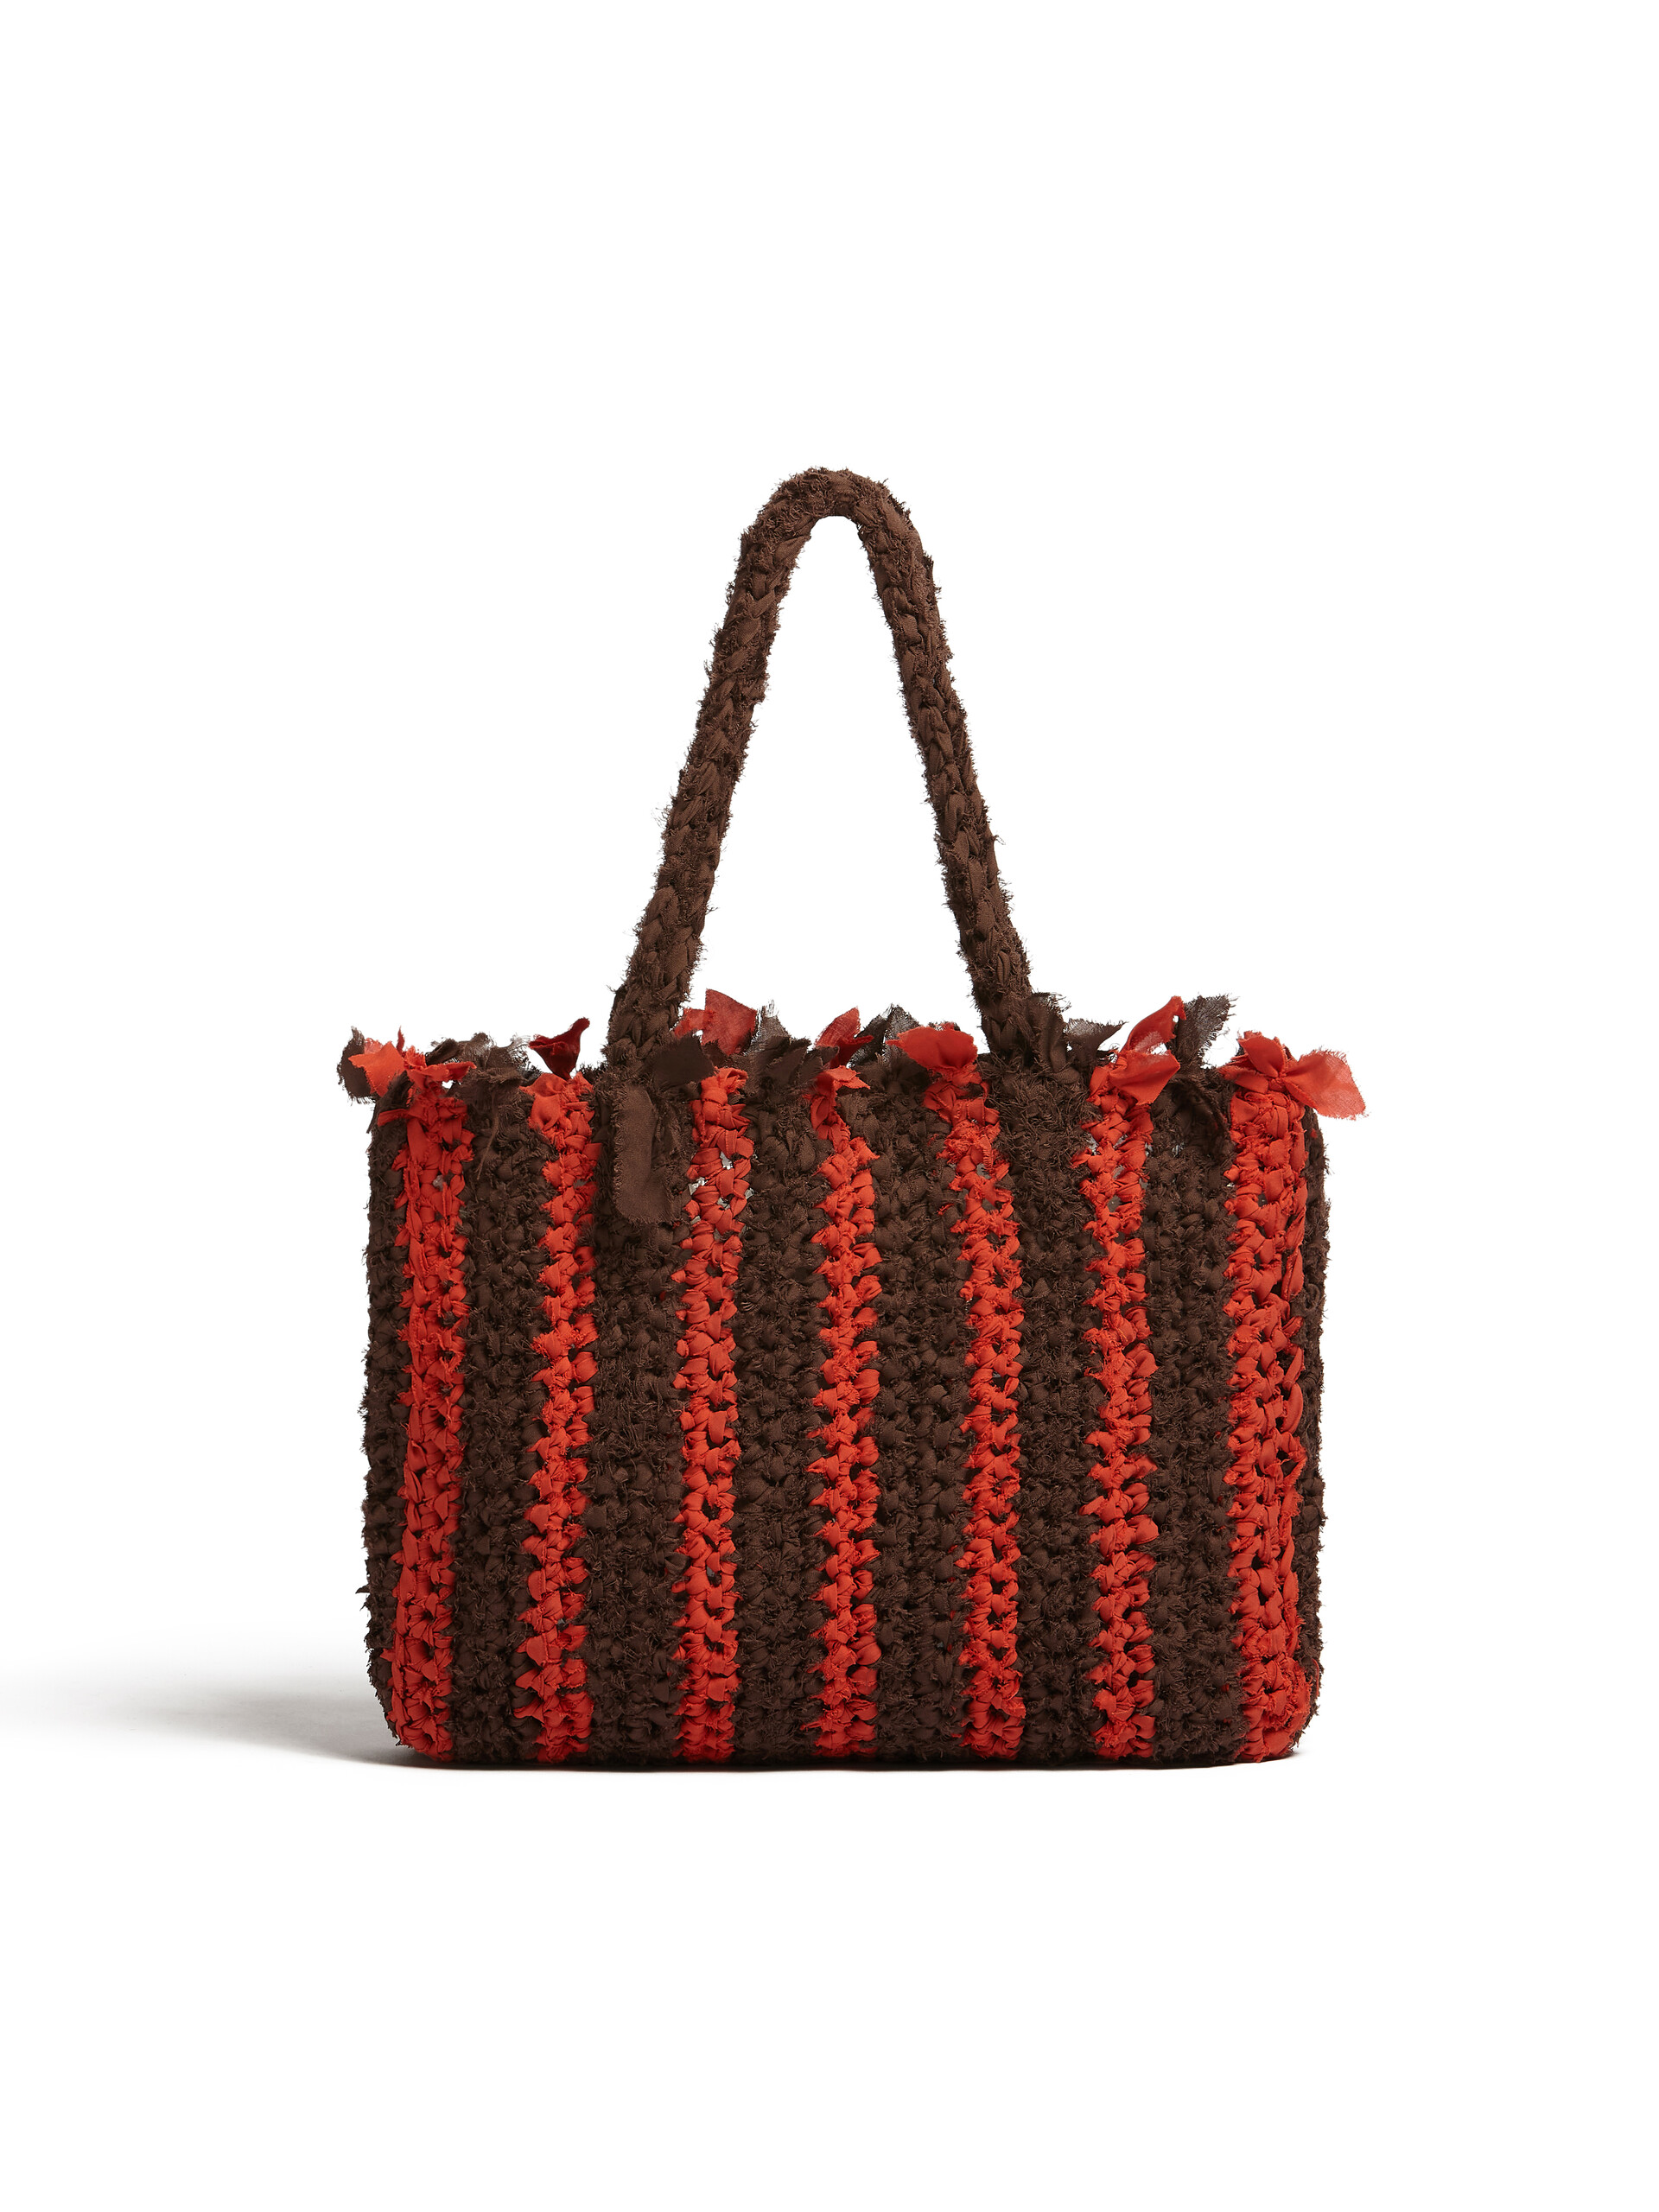 MARNI MARKET bag in brown and red cotton - Bags - Image 3